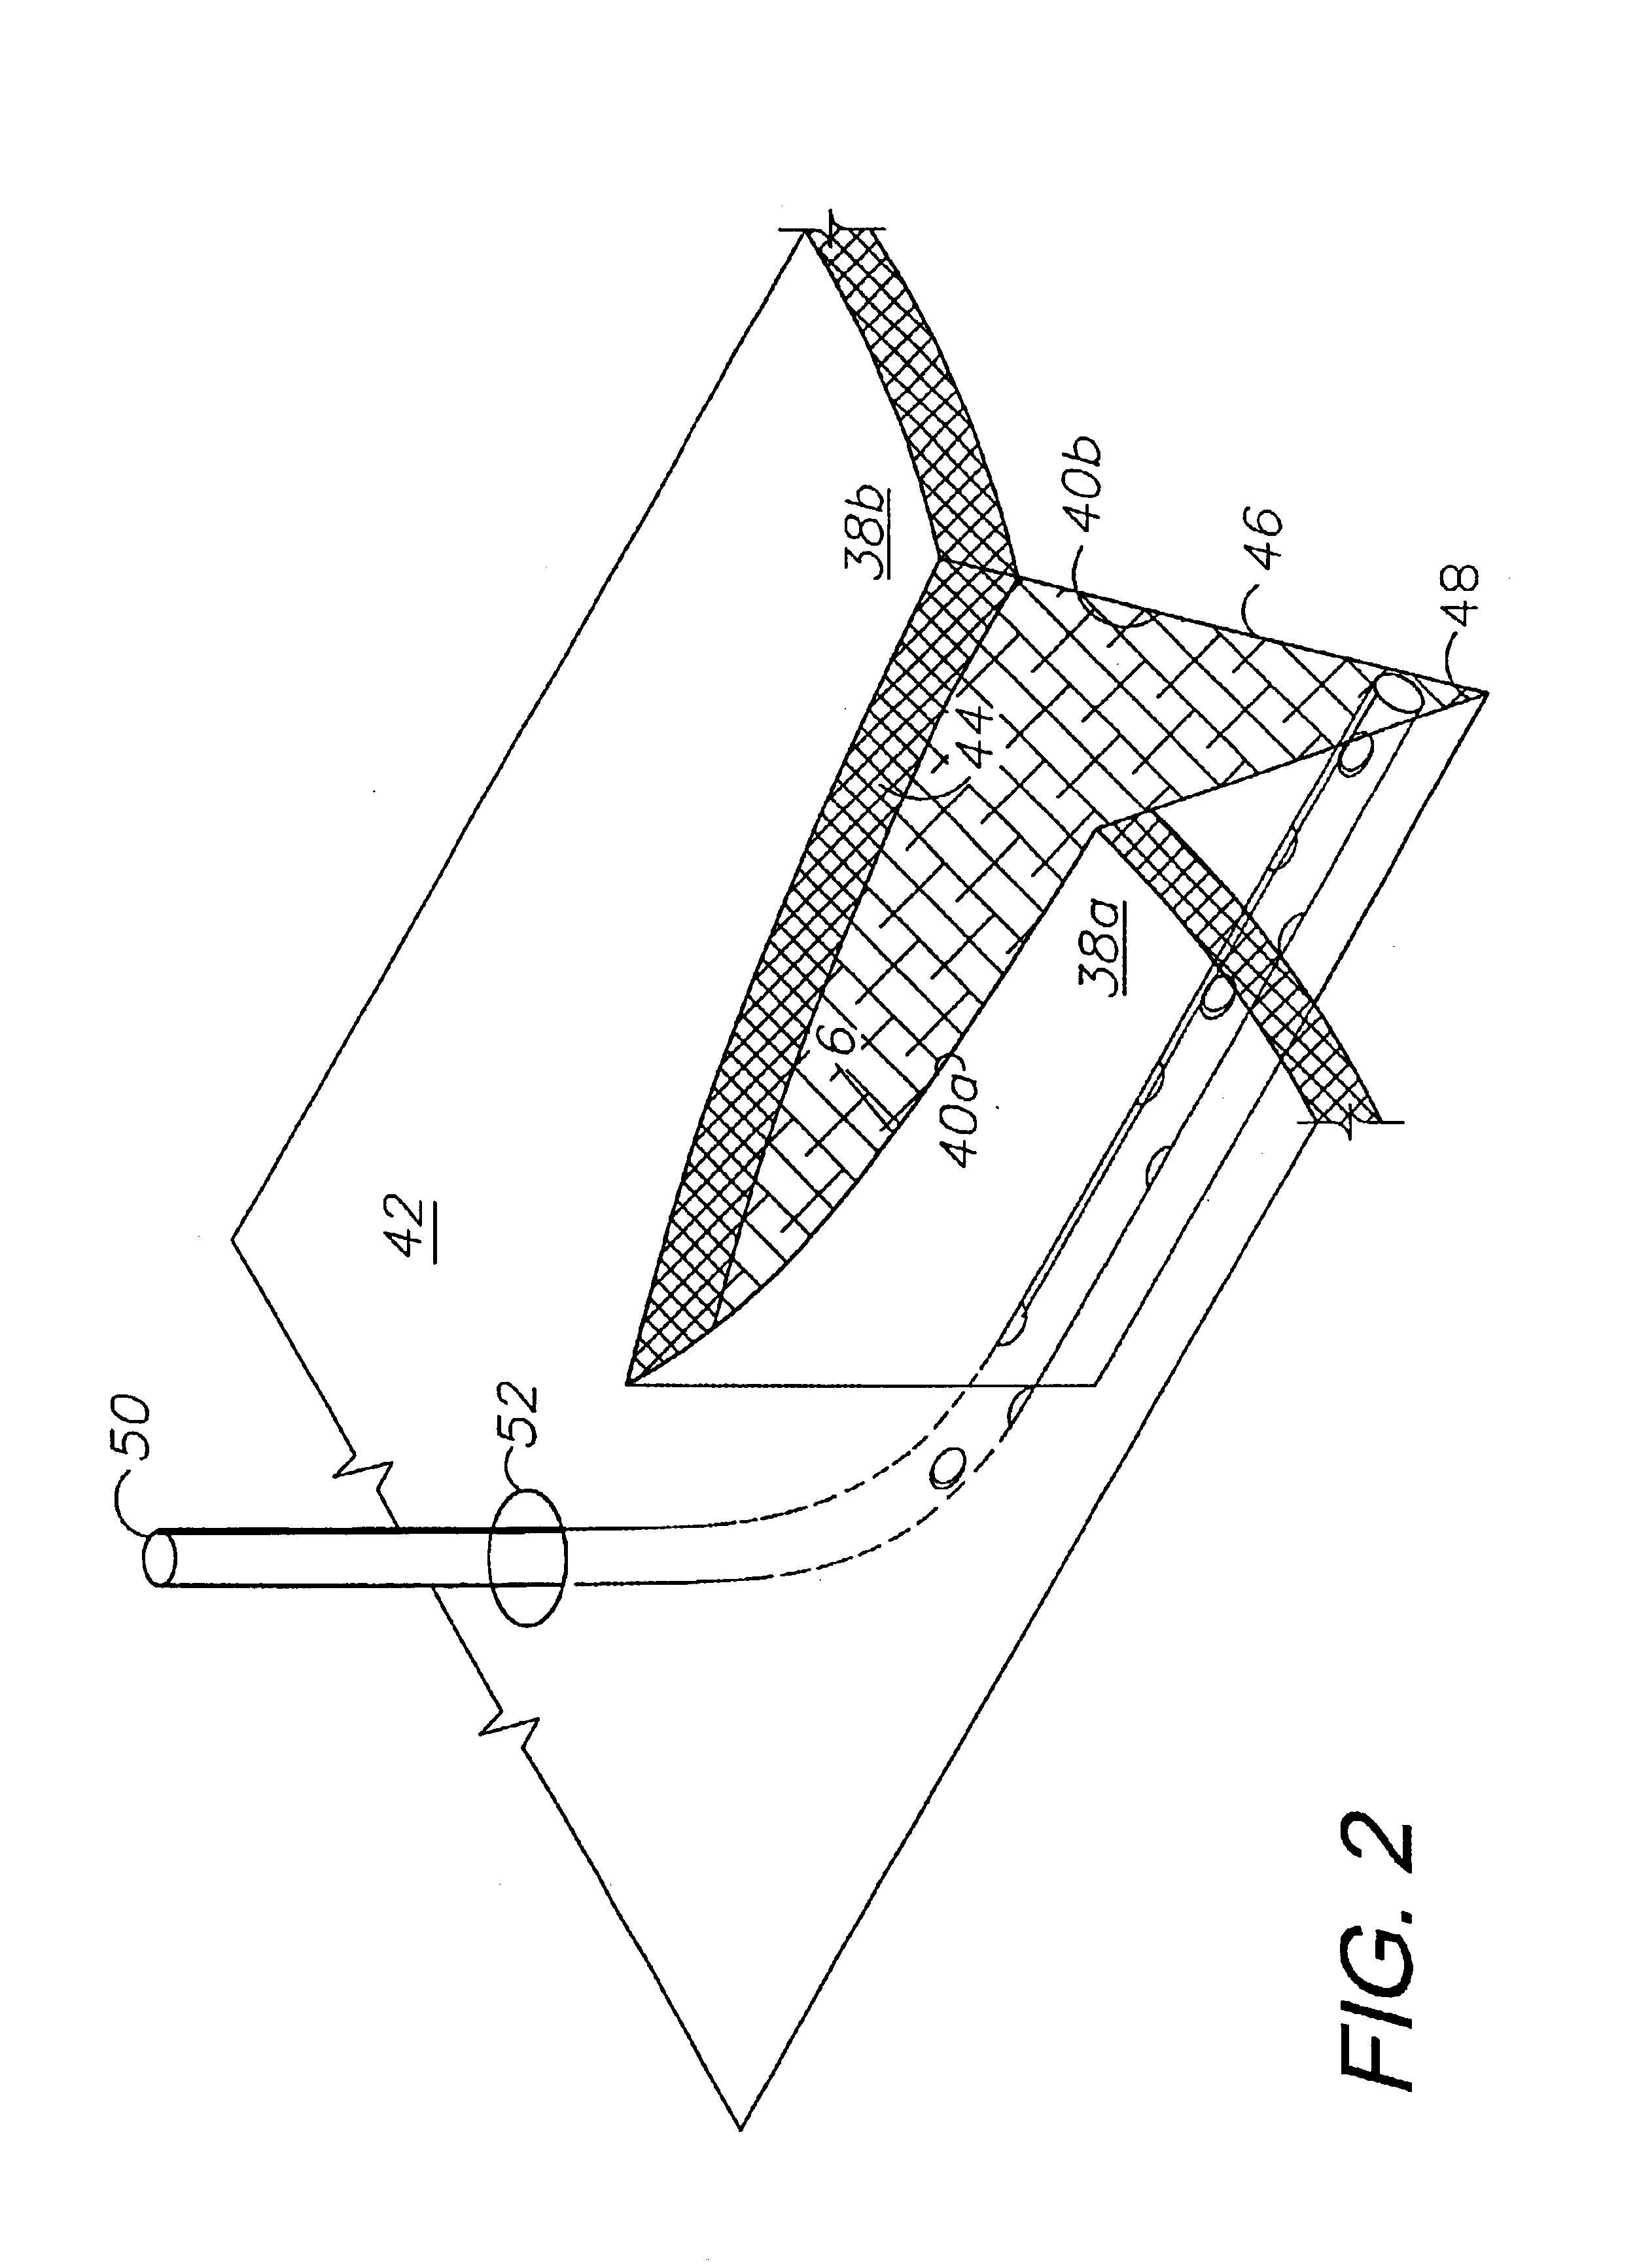 Tissue closure treatment system and method with externally-applied patient interface